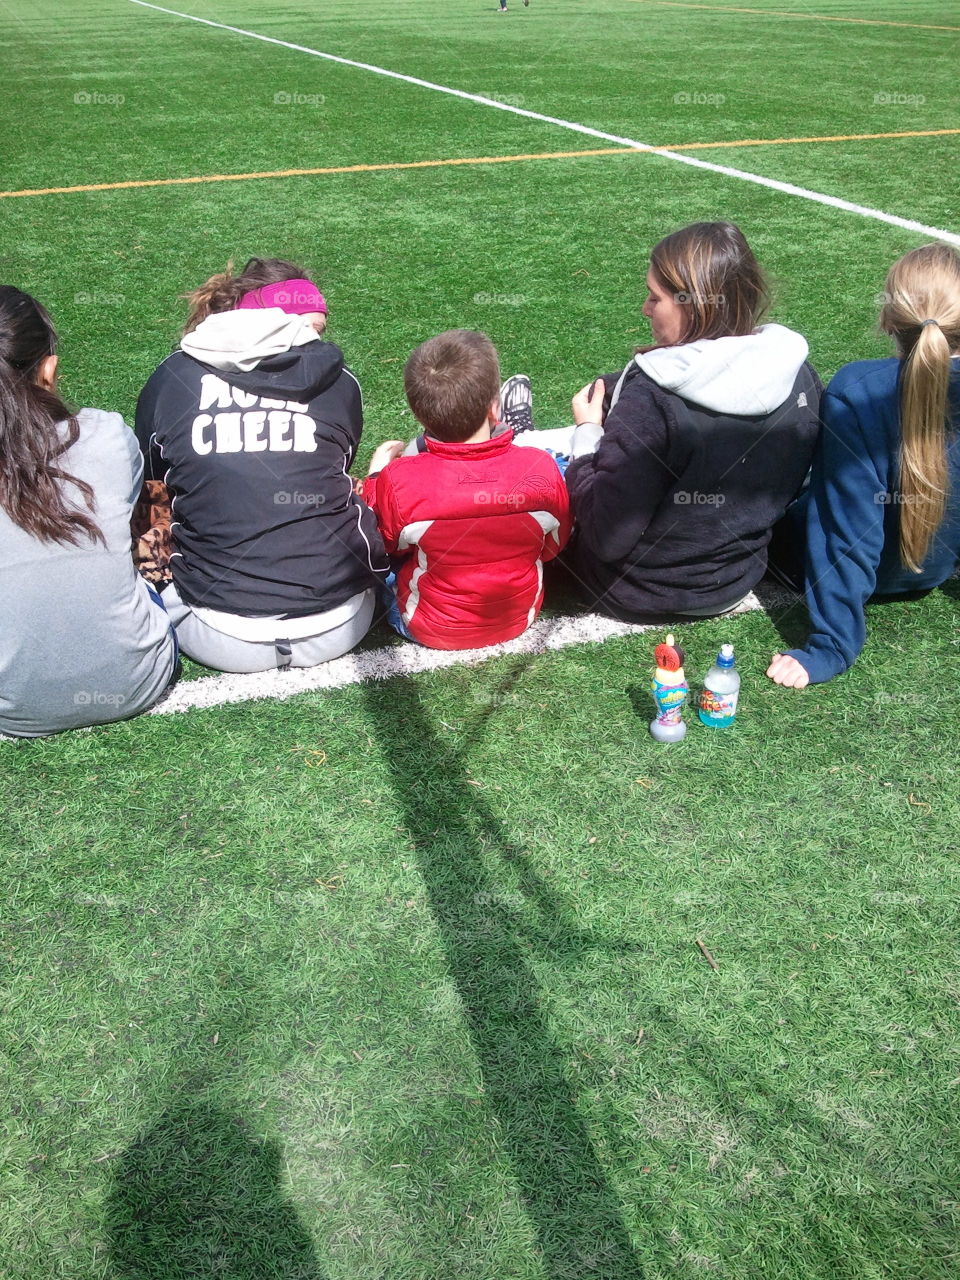 One of the team. Little brother sitting with the team watching his big sister play soccer.